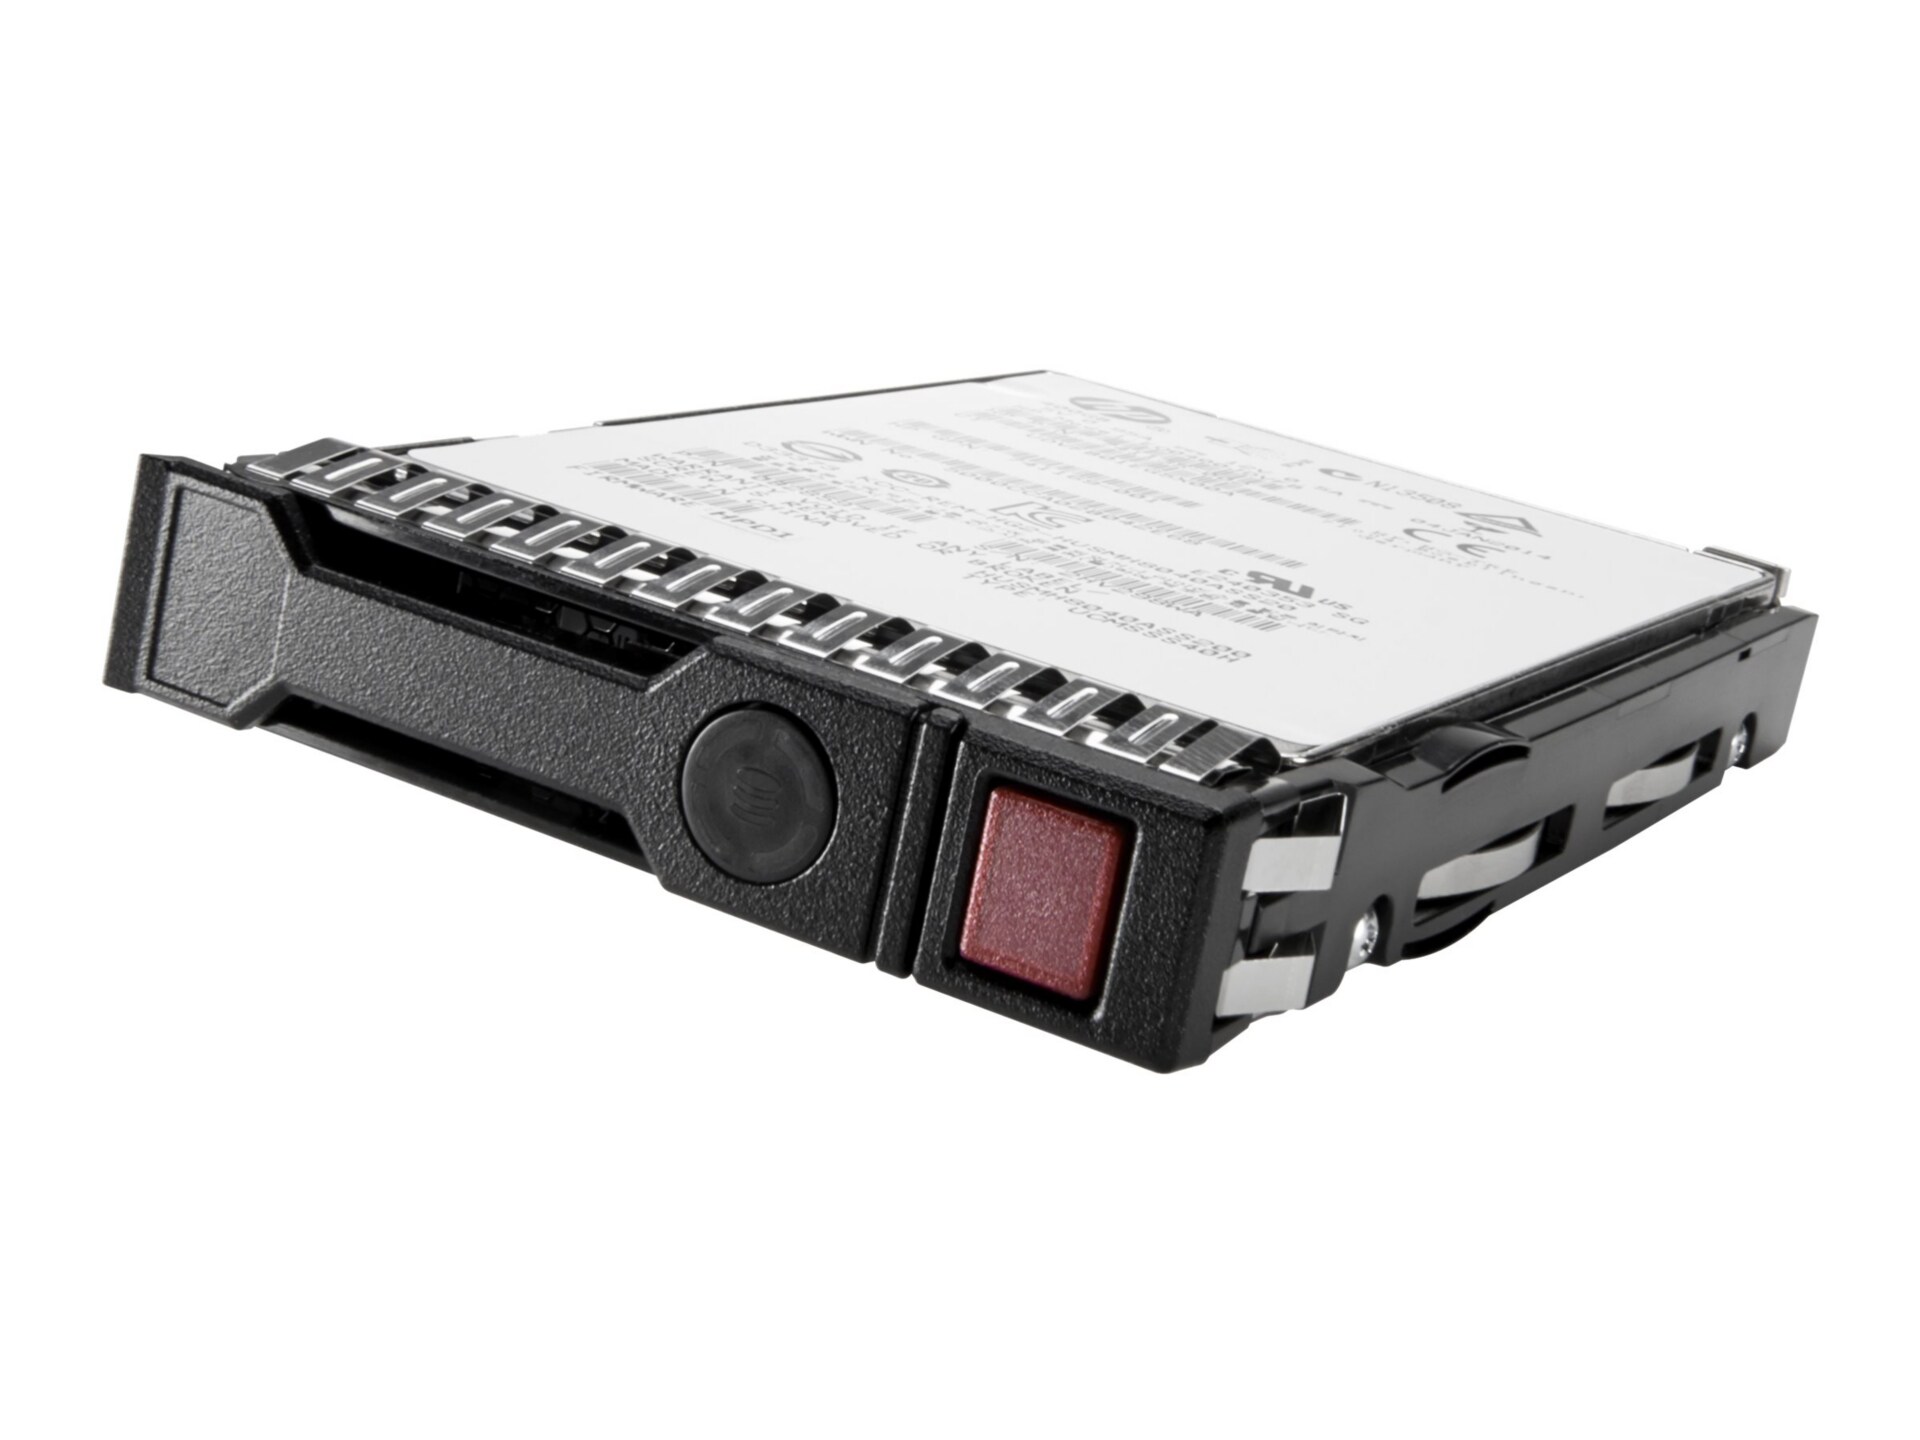 HPE Mixed Use - solid state drive - 3.84 TB - SATA 6Gb/s